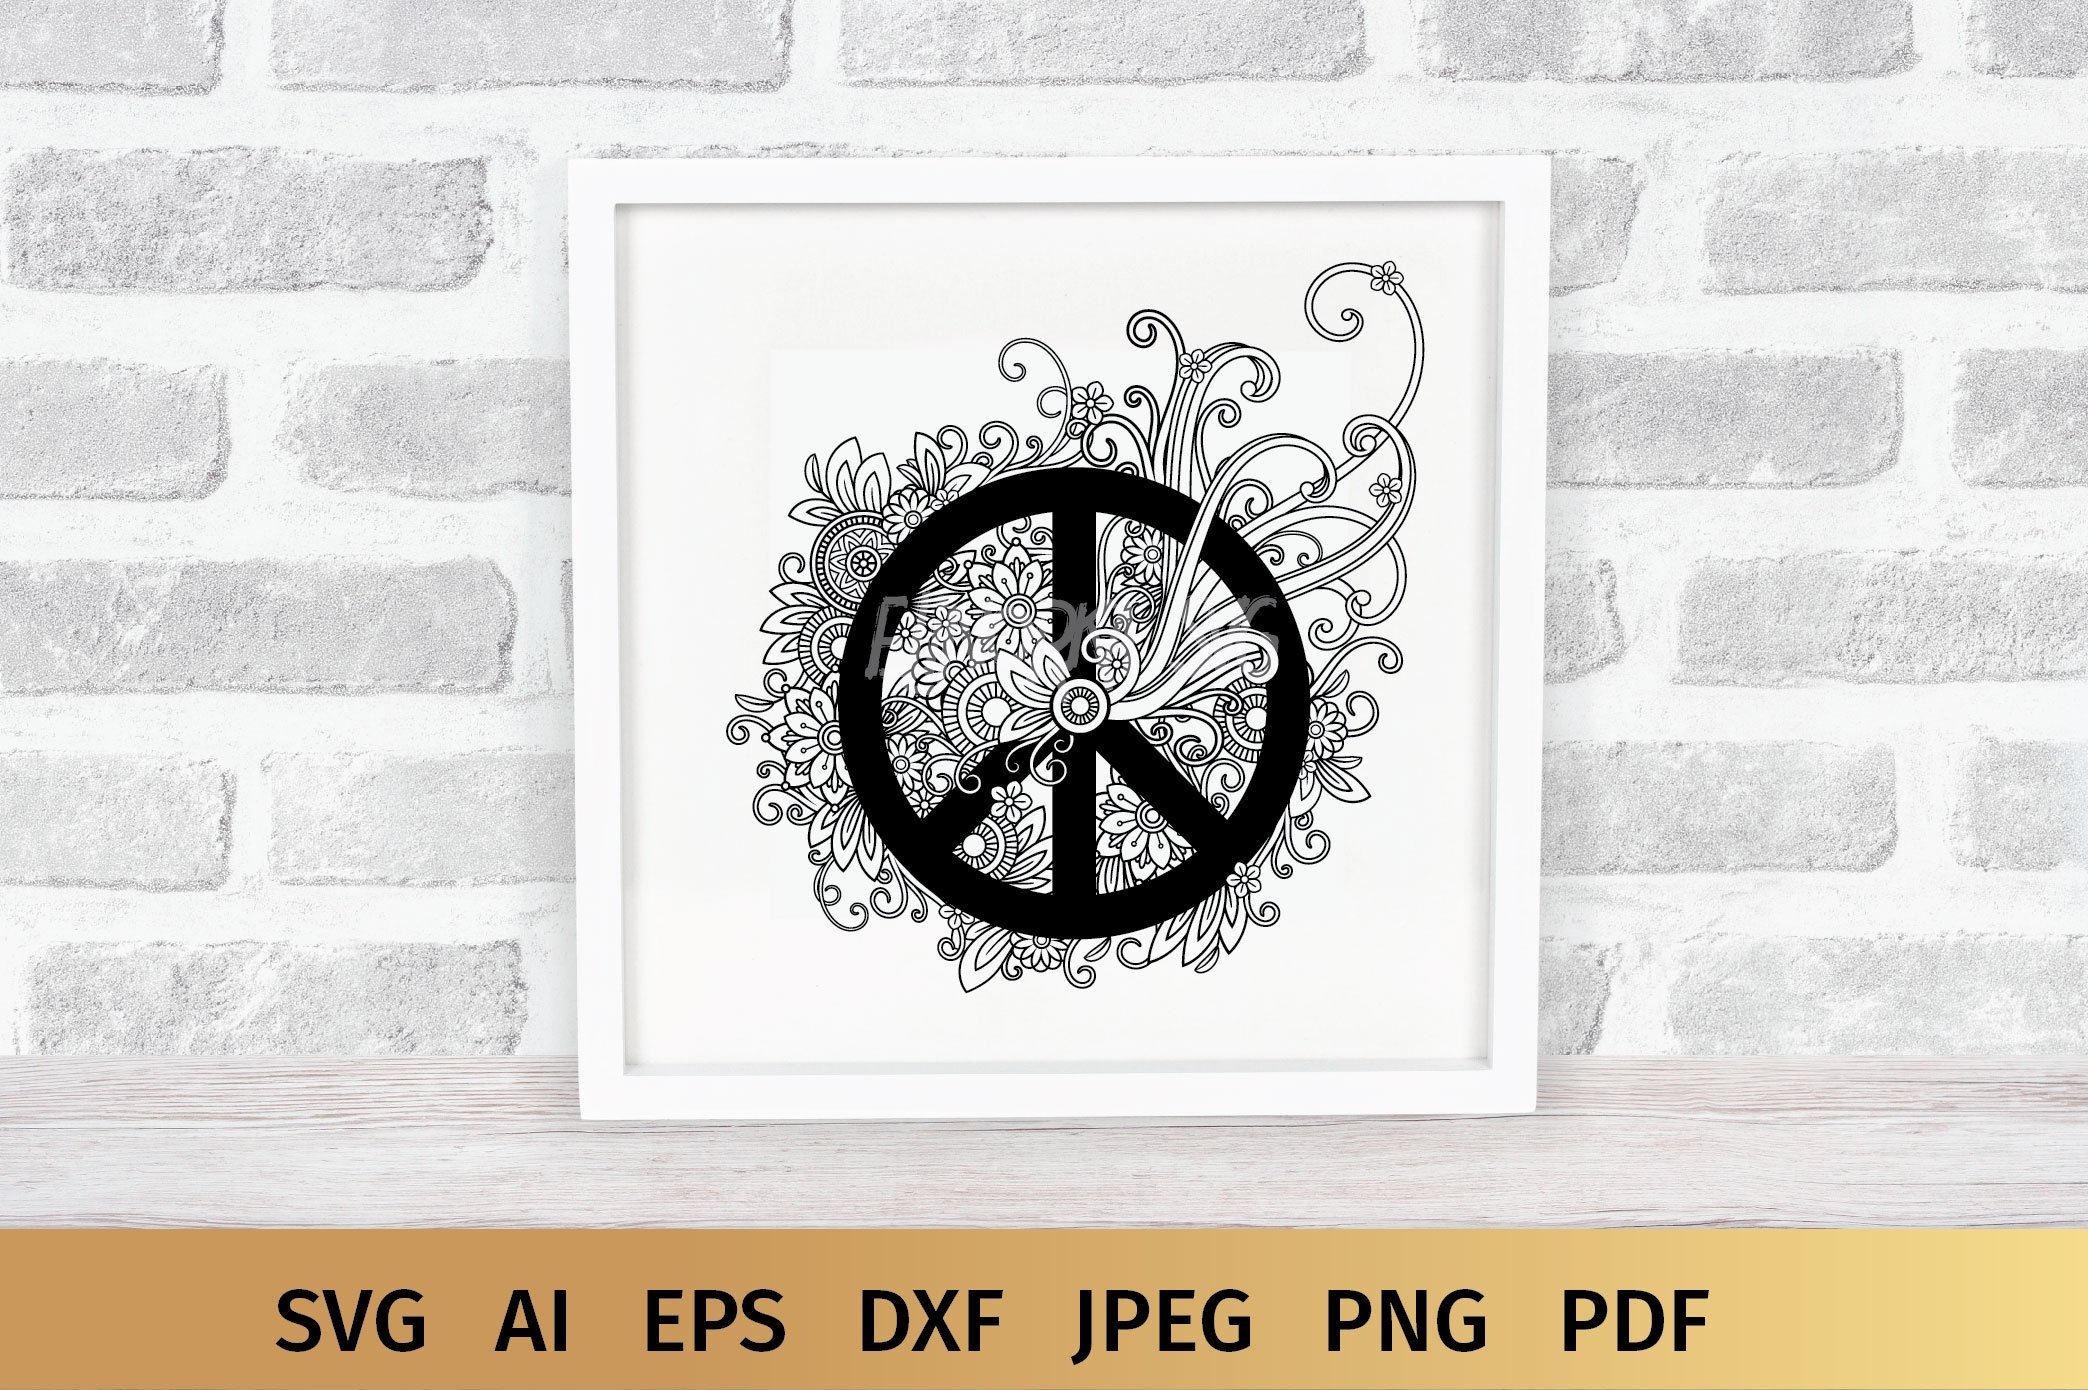 Black peace sign on a white poster.